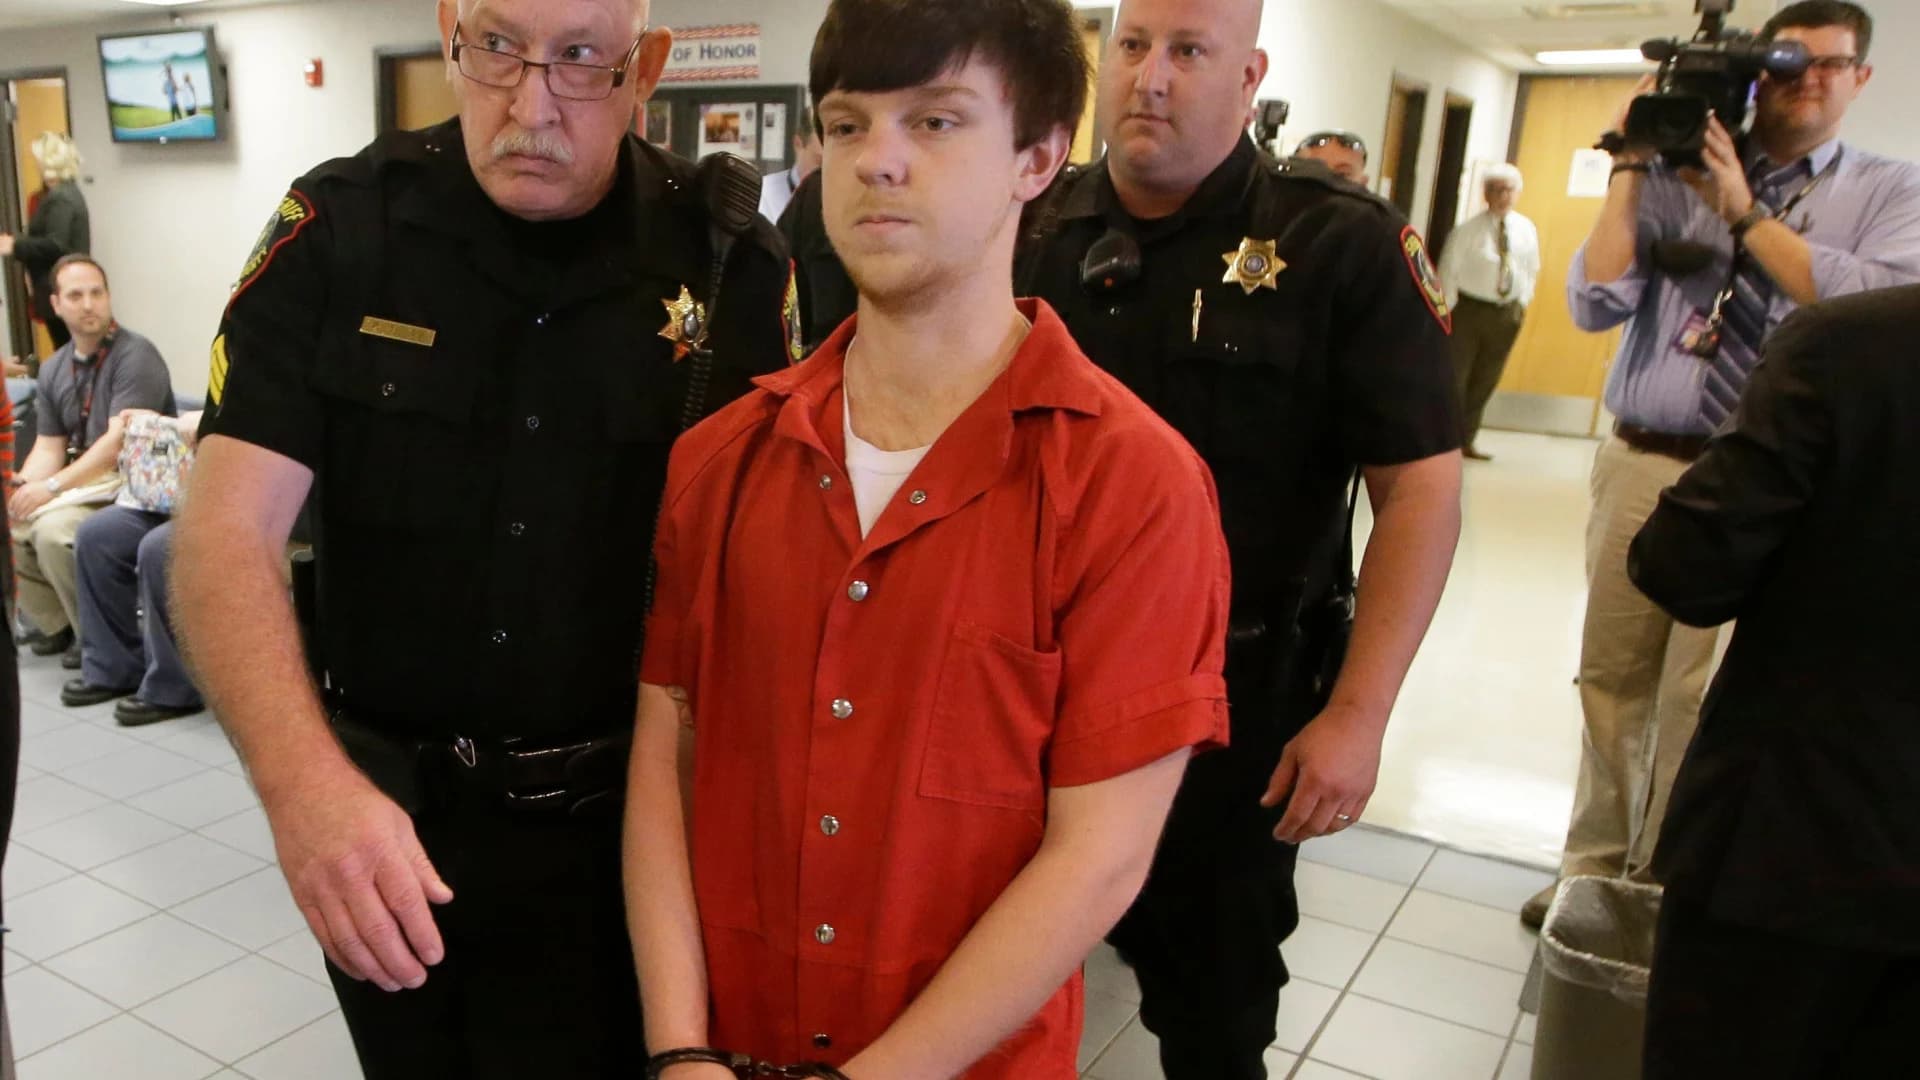 Ethan Couch, who used 'affluenza' defense at trial, jailed for probation violation